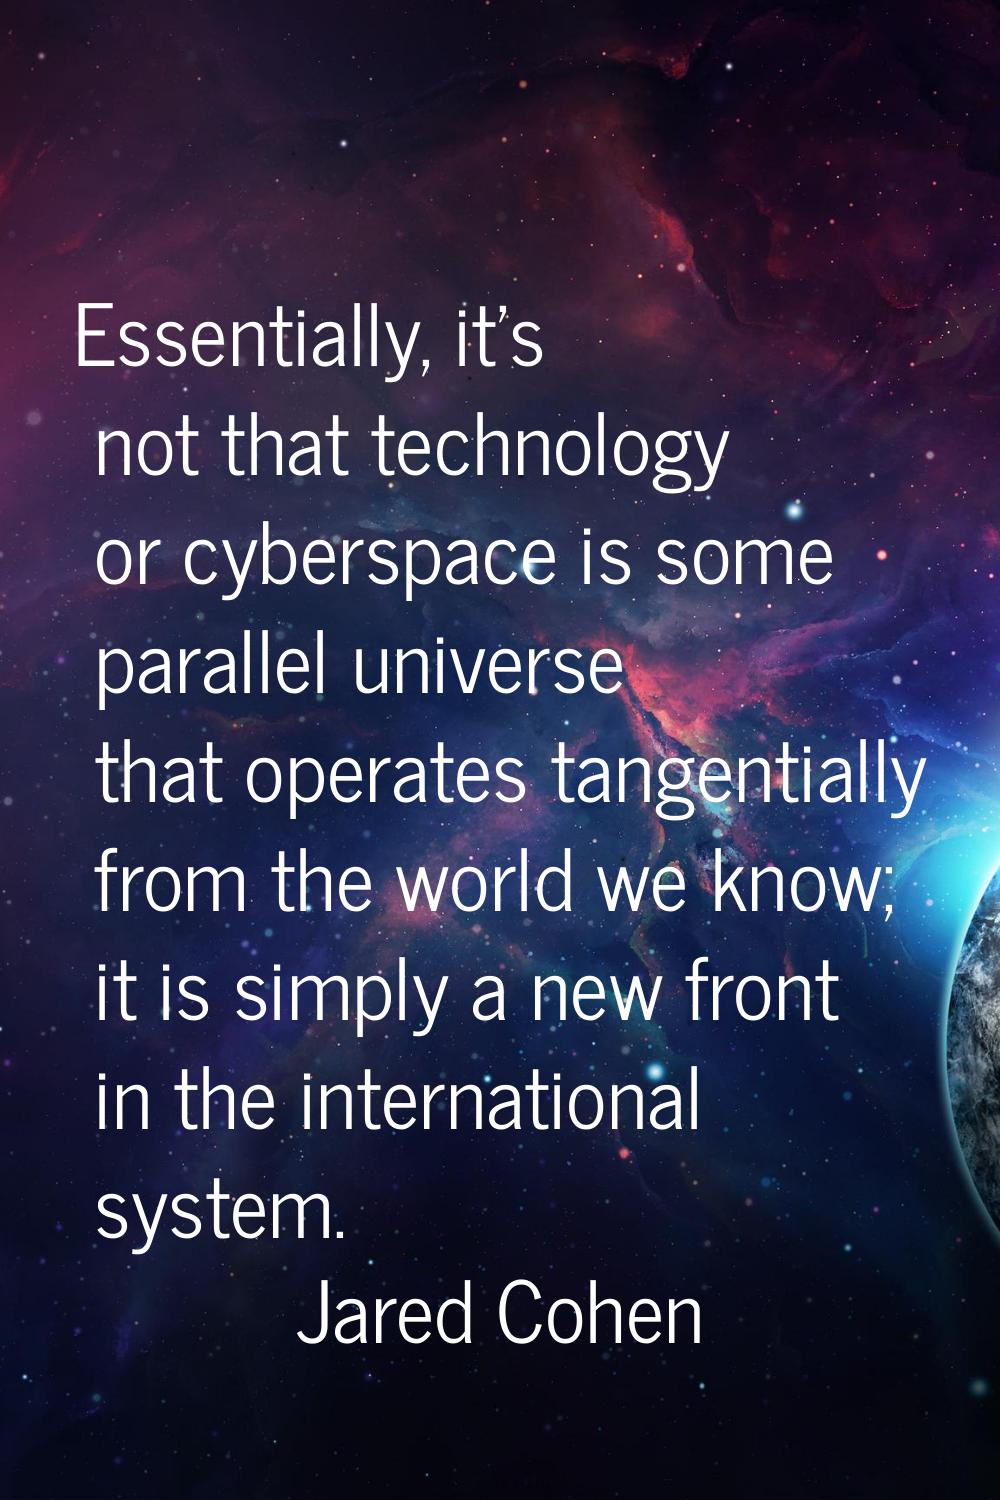 Essentially, it's not that technology or cyberspace is some parallel universe that operates tangent